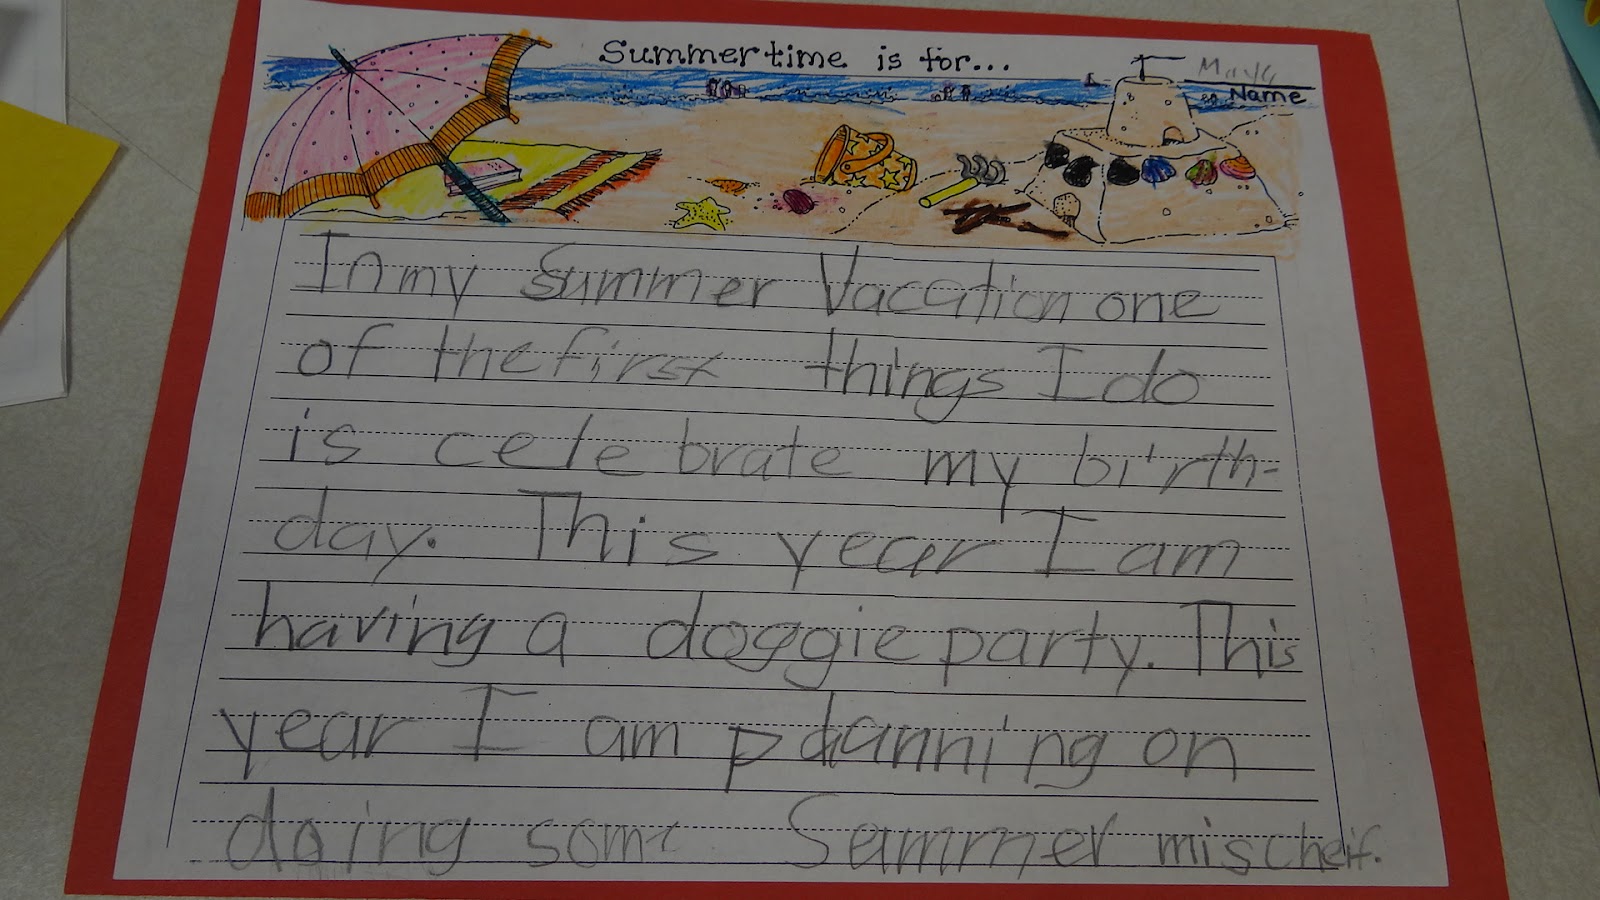 How do you write an essay on summer vacations for kids?